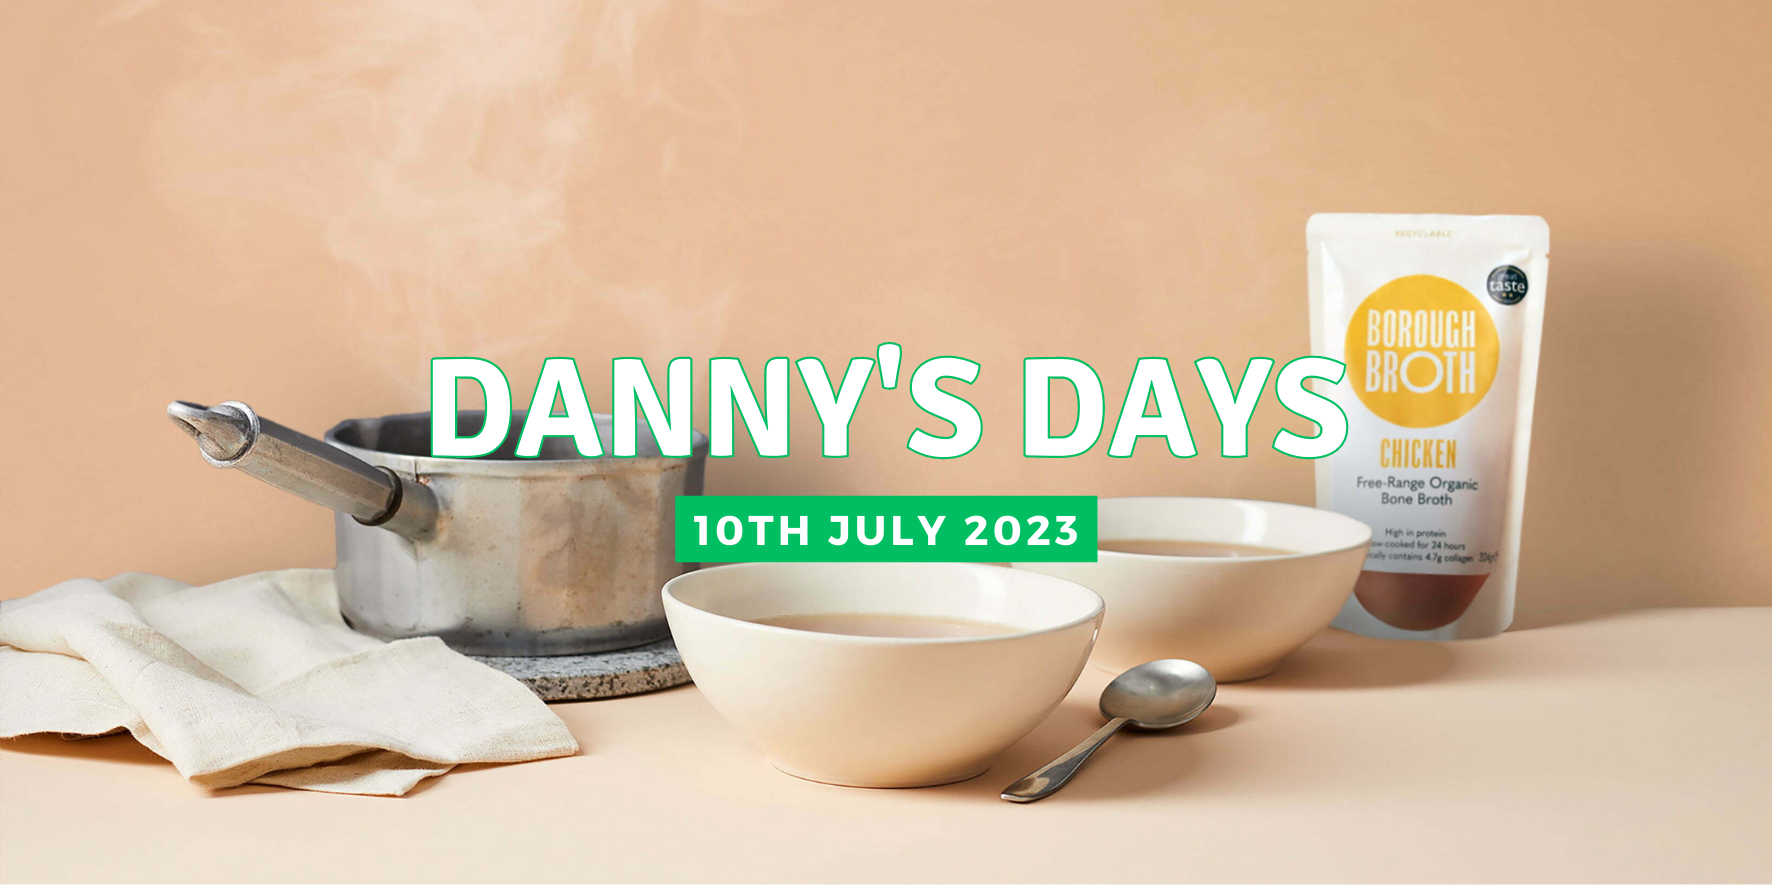 Danny's Days - 10th July 2023